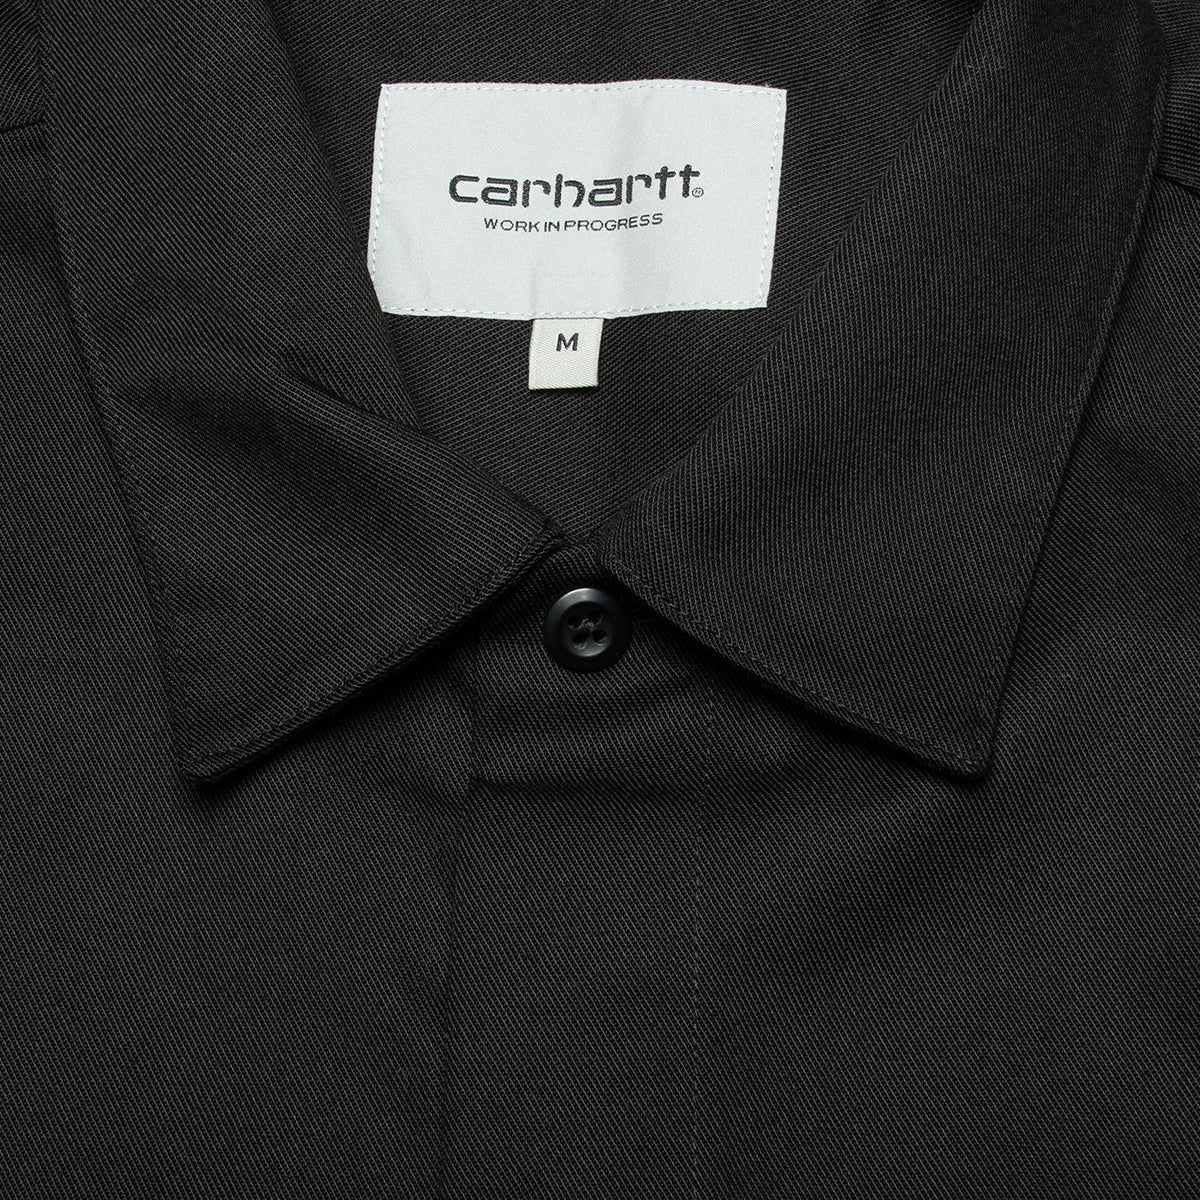 Carhartt WIP S/S Master Shirt Style # I027580-89XX Color : Black